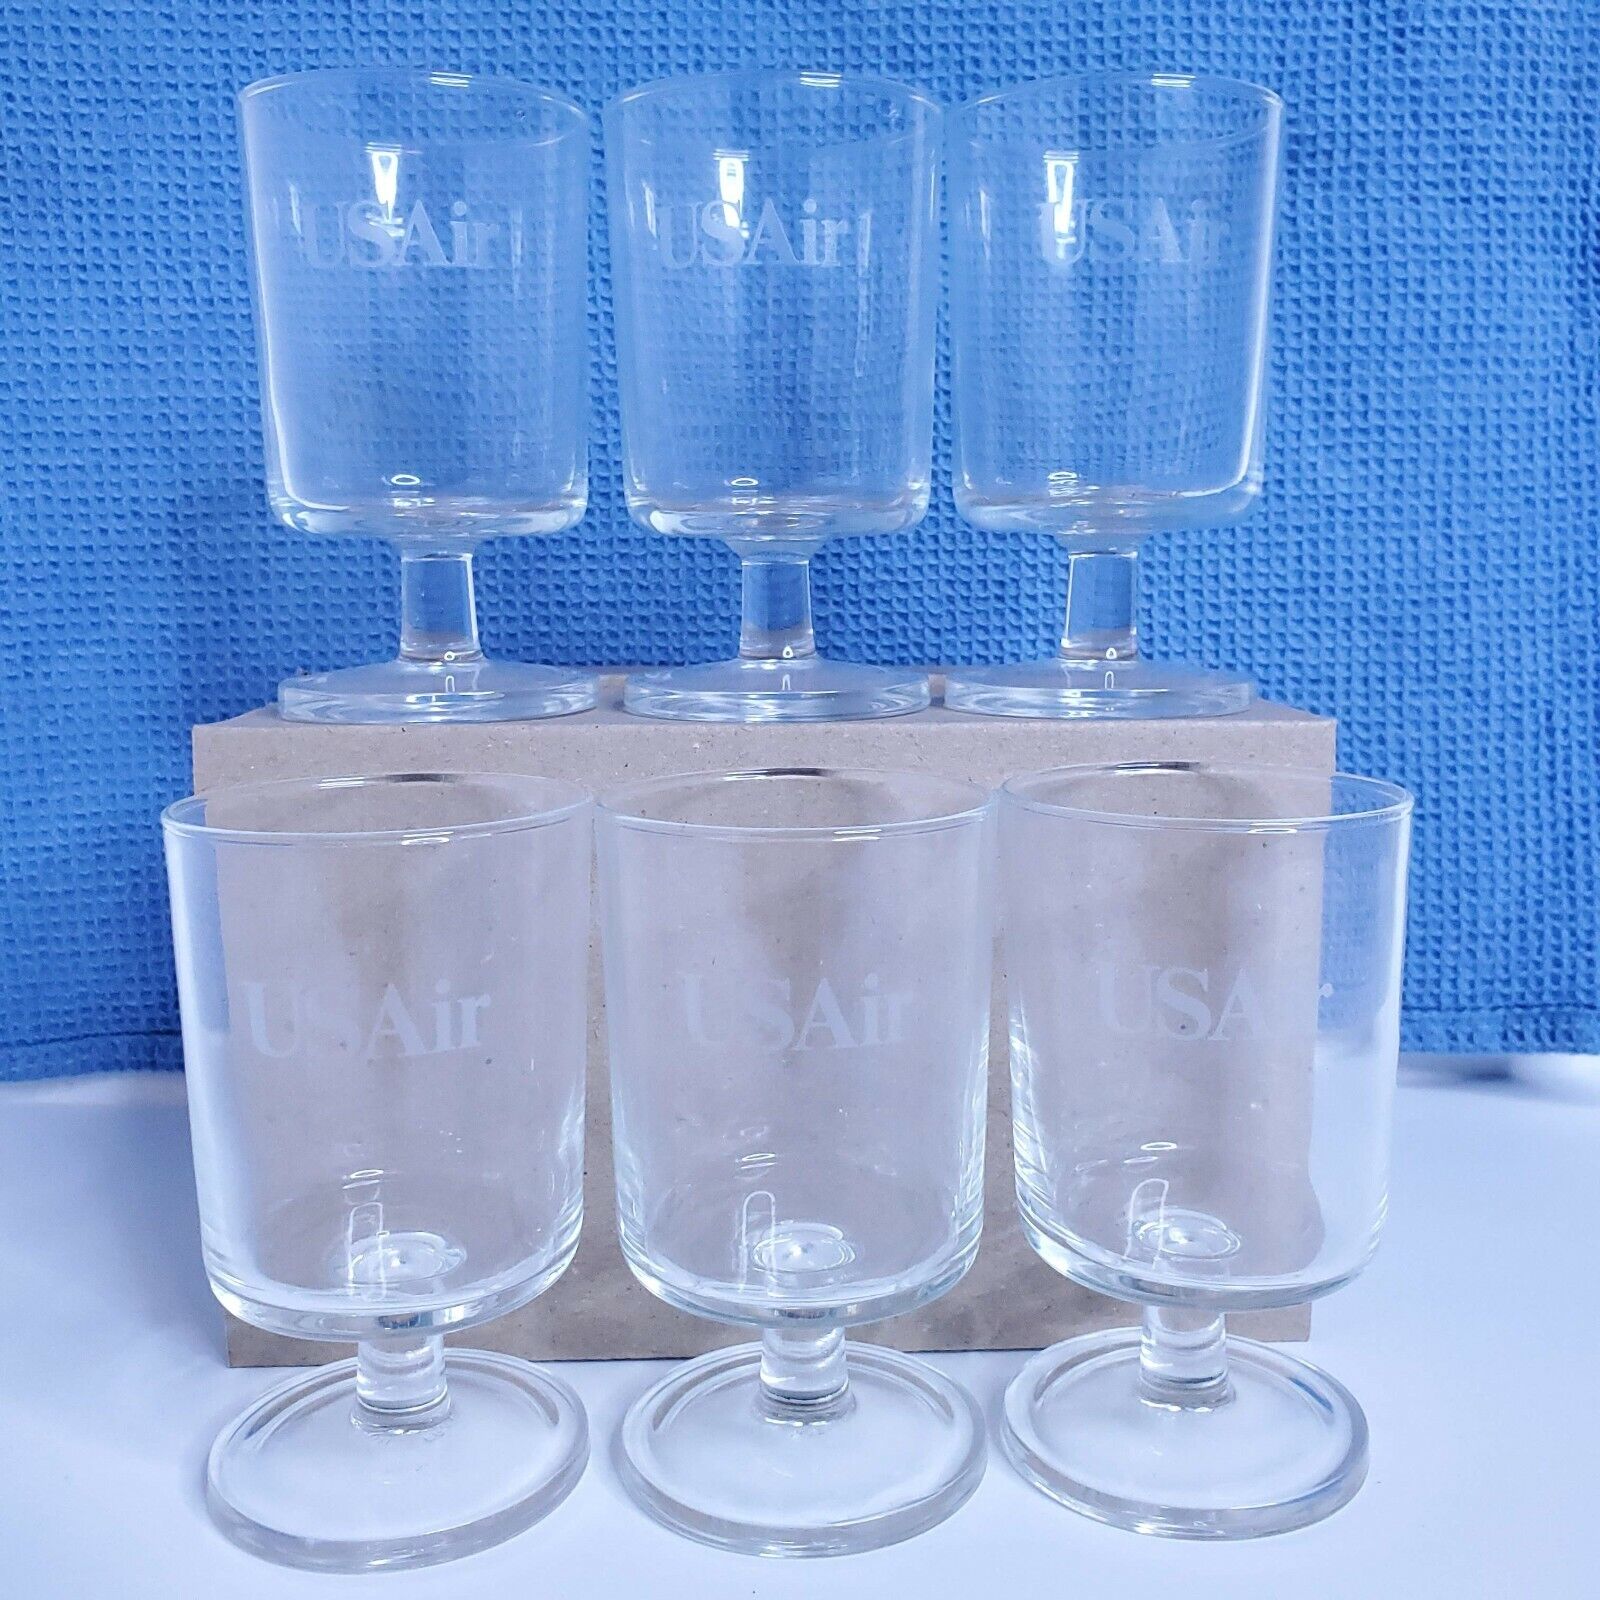 Vintage USAir Airlines 4 Ounce Wine Glasses Set of 6 Luminarc Made in France